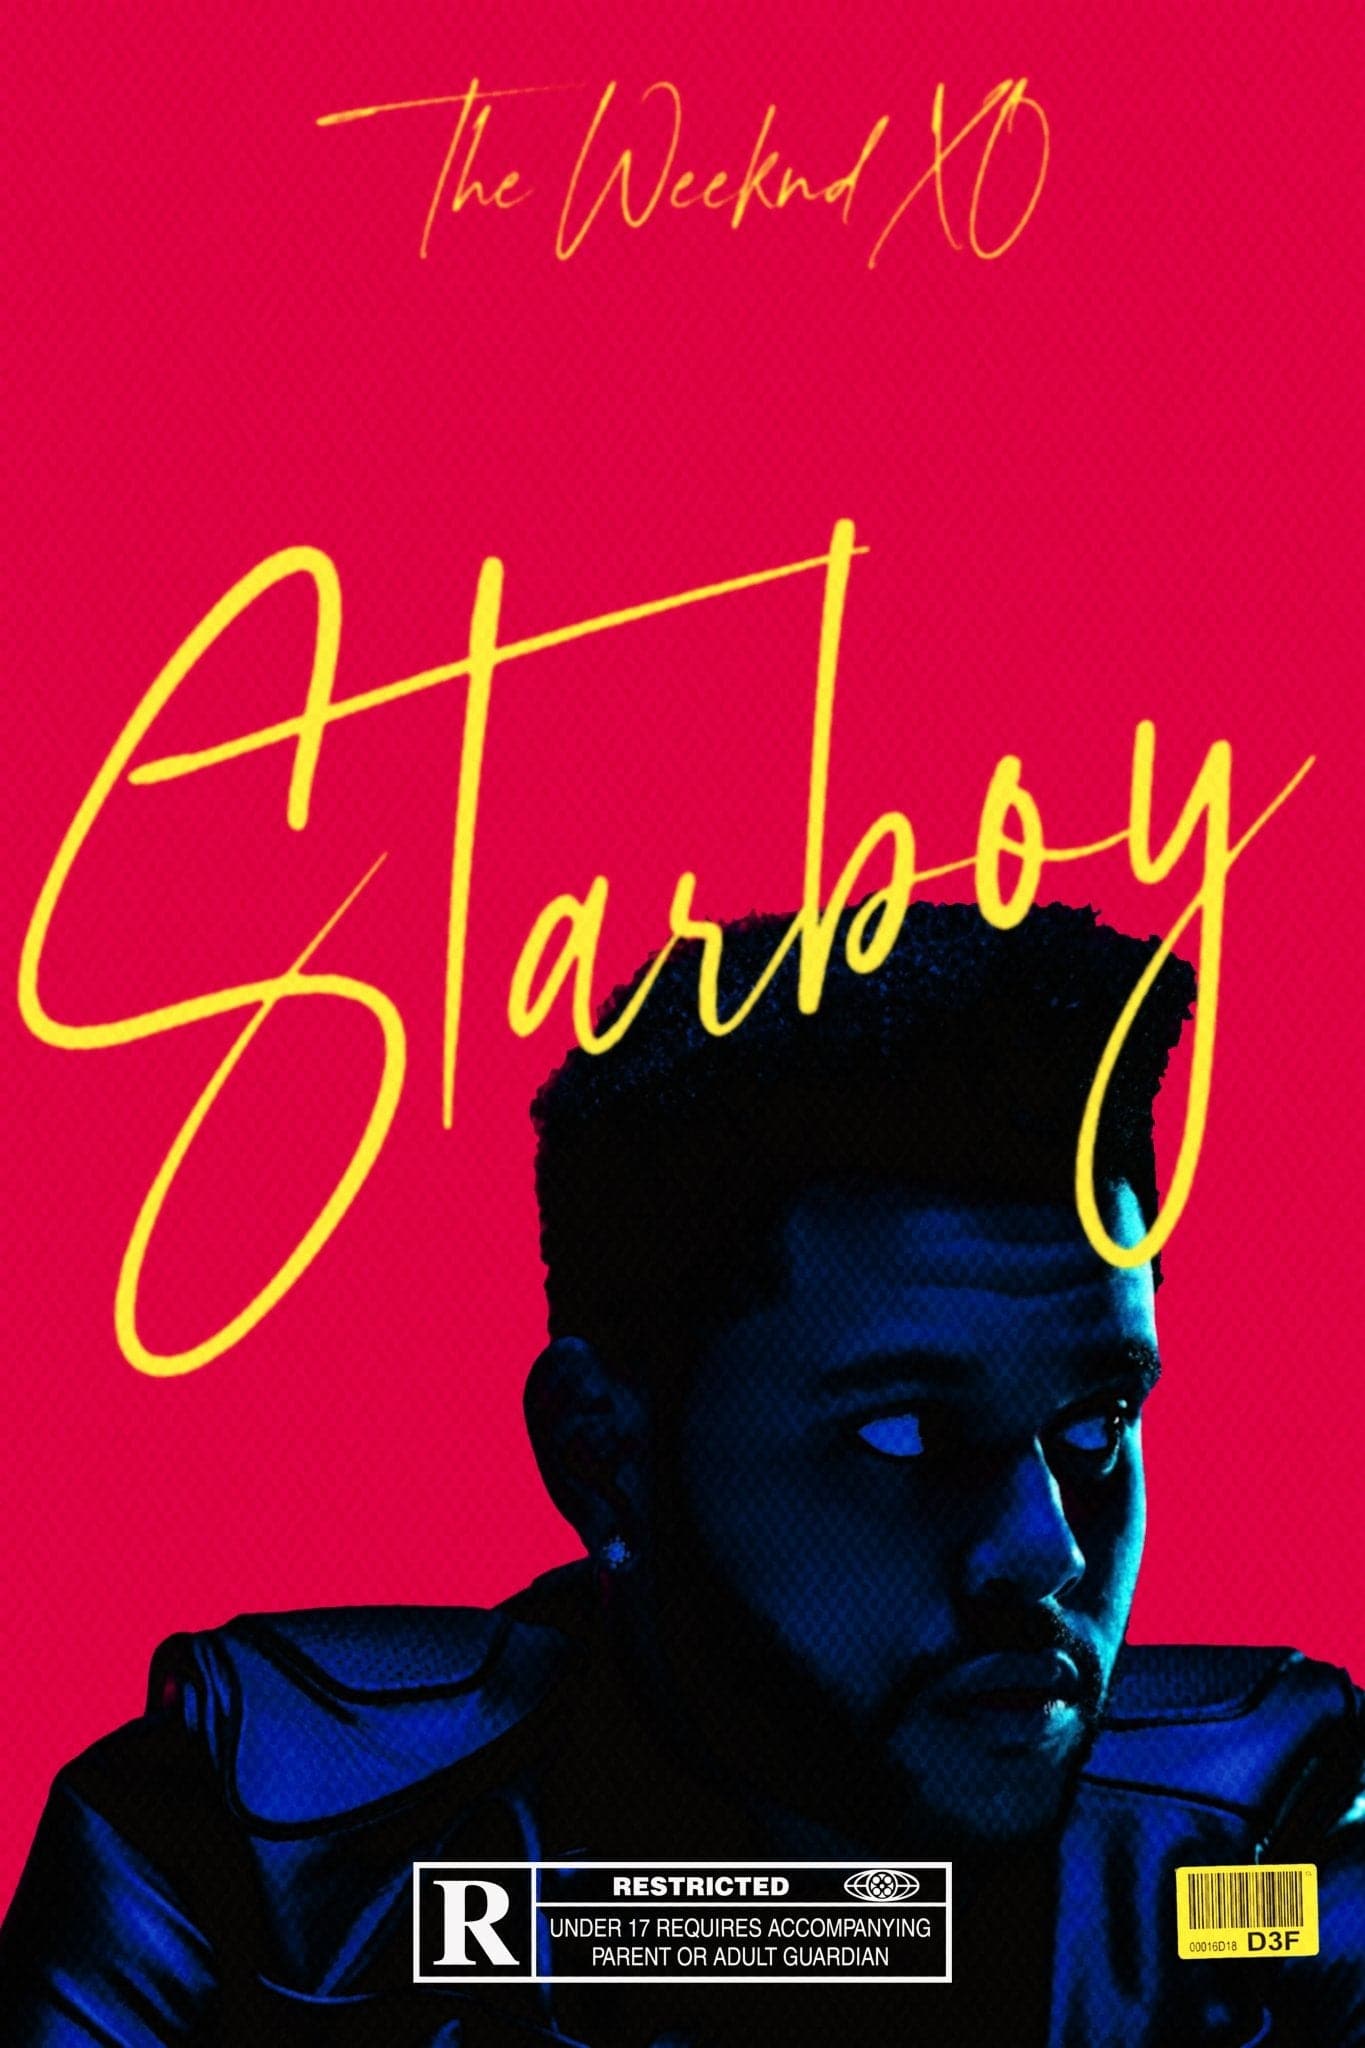 Seven times The Weeknd demonstrated Starboy style